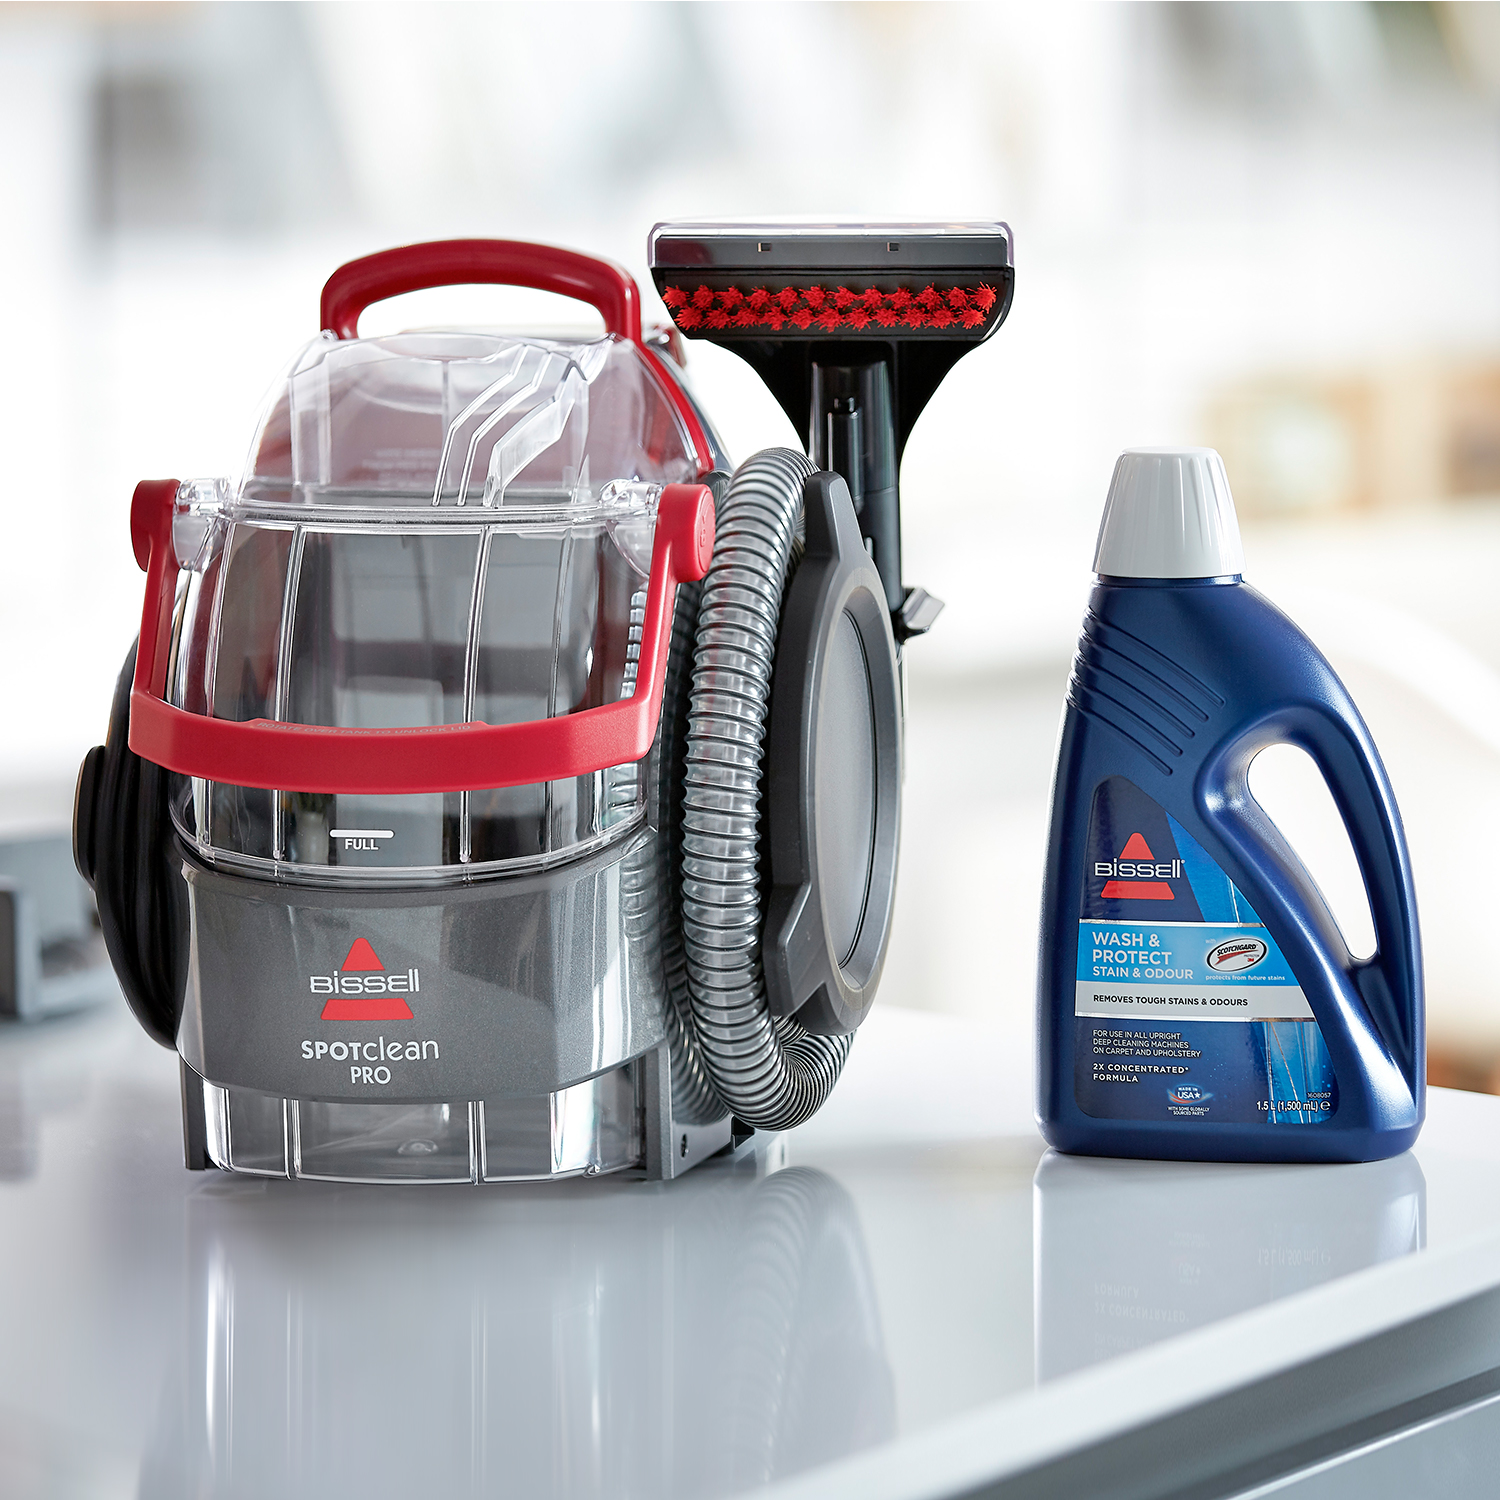 Bissell SpotClean Pro Portable Carpet Cleaner